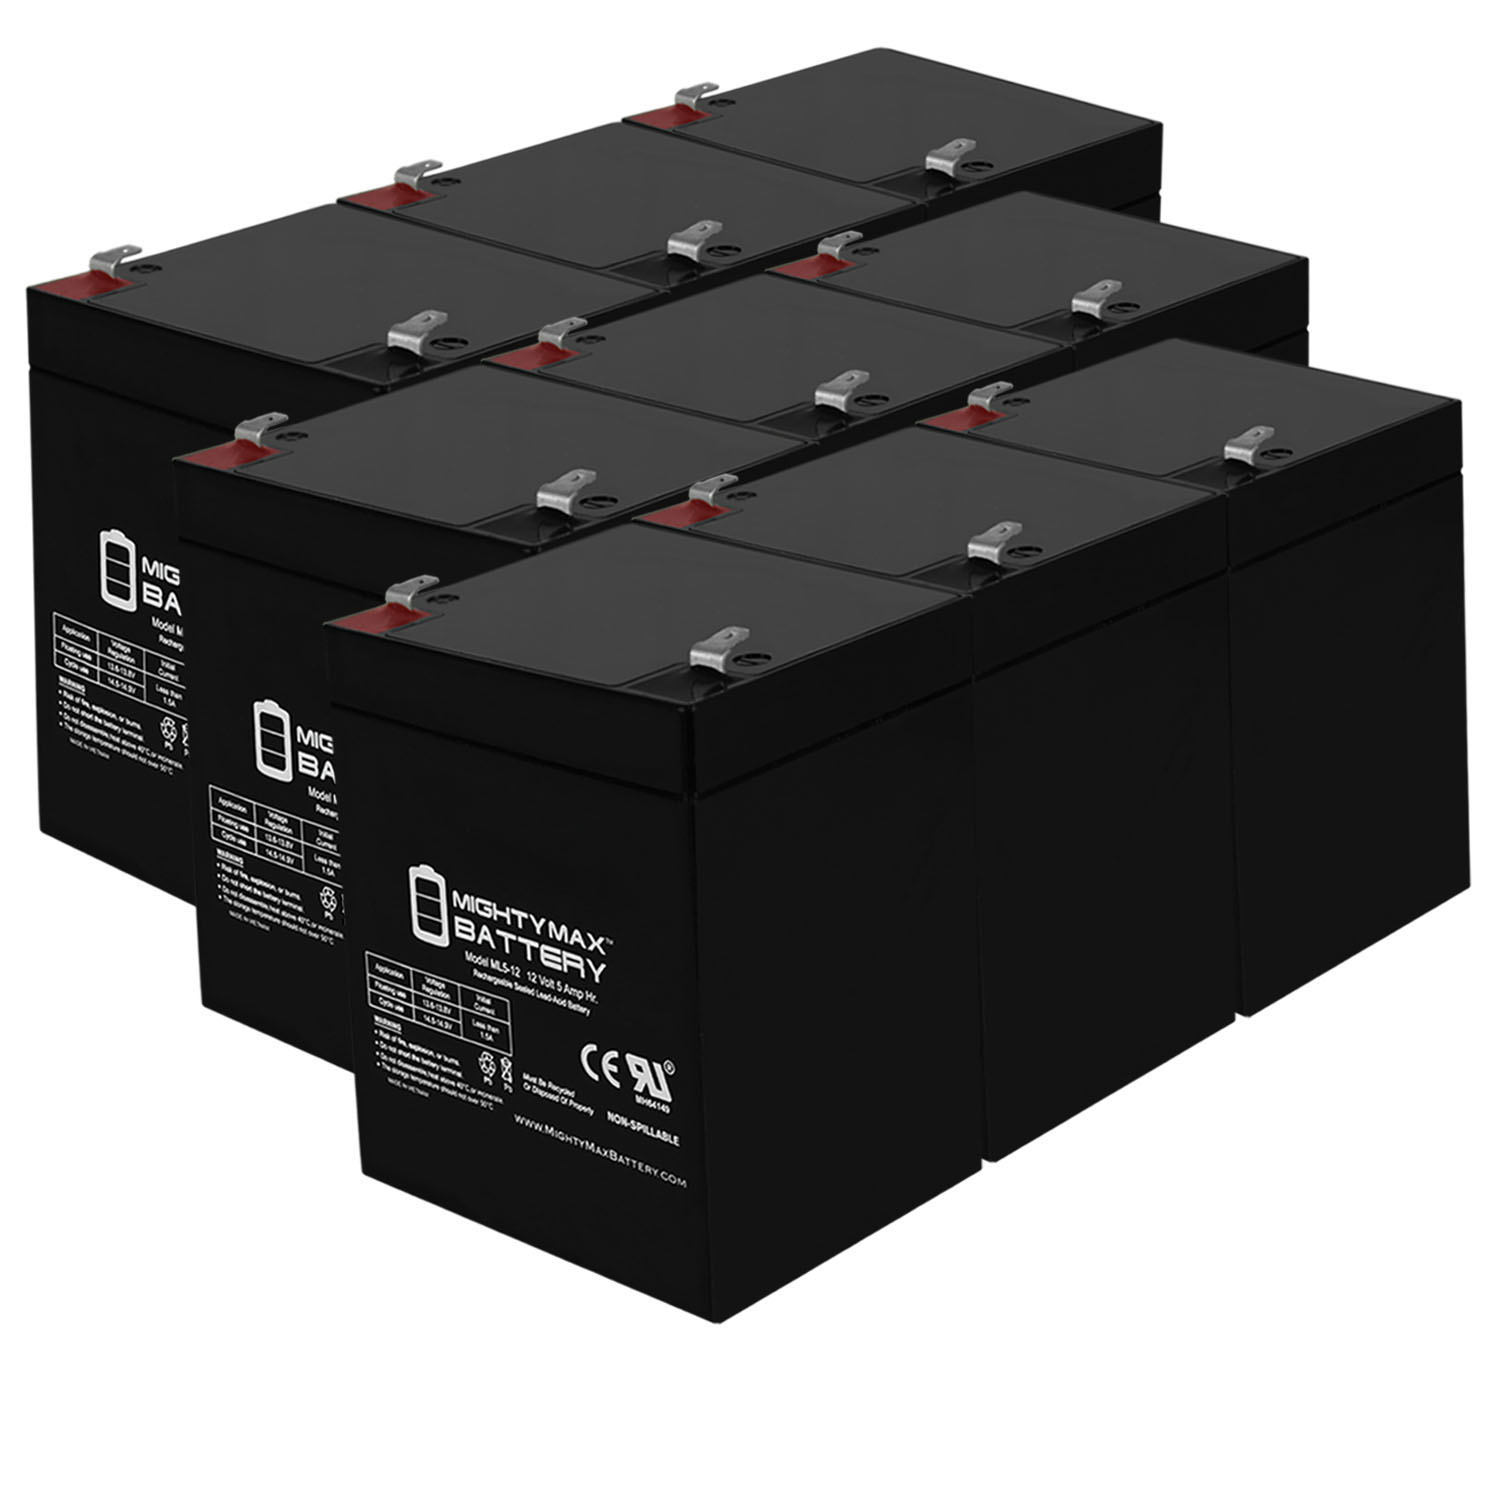 12V 5AH SLA Replacement Battery for Mule 6PL008B - 9 Pack